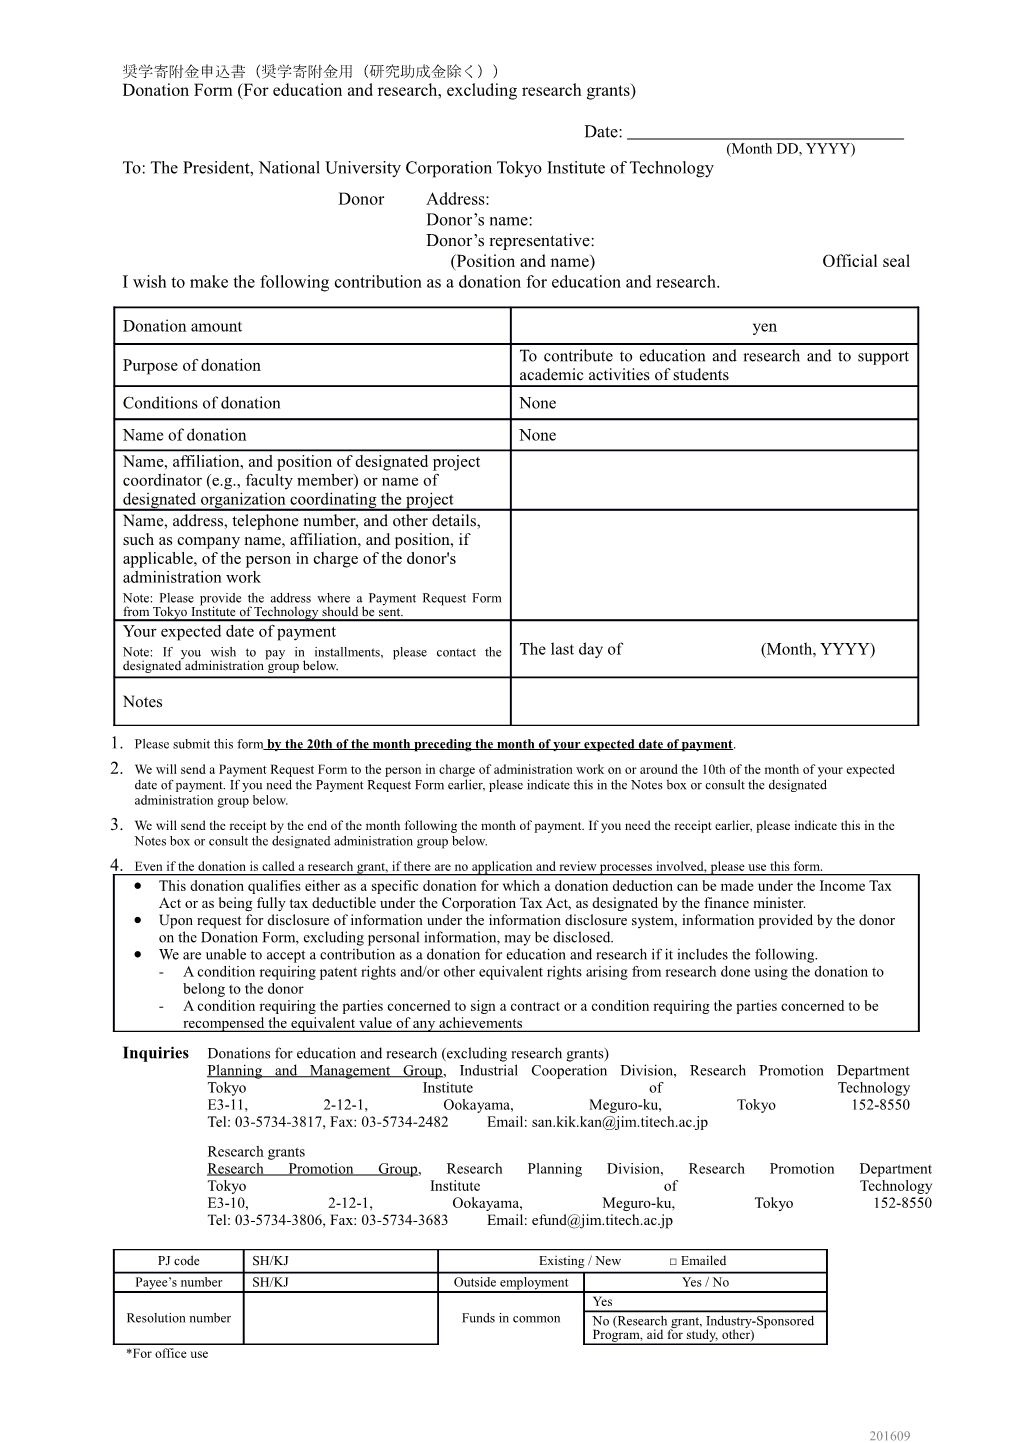 Donation Form (For Education and Research, Excluding Research Grants)